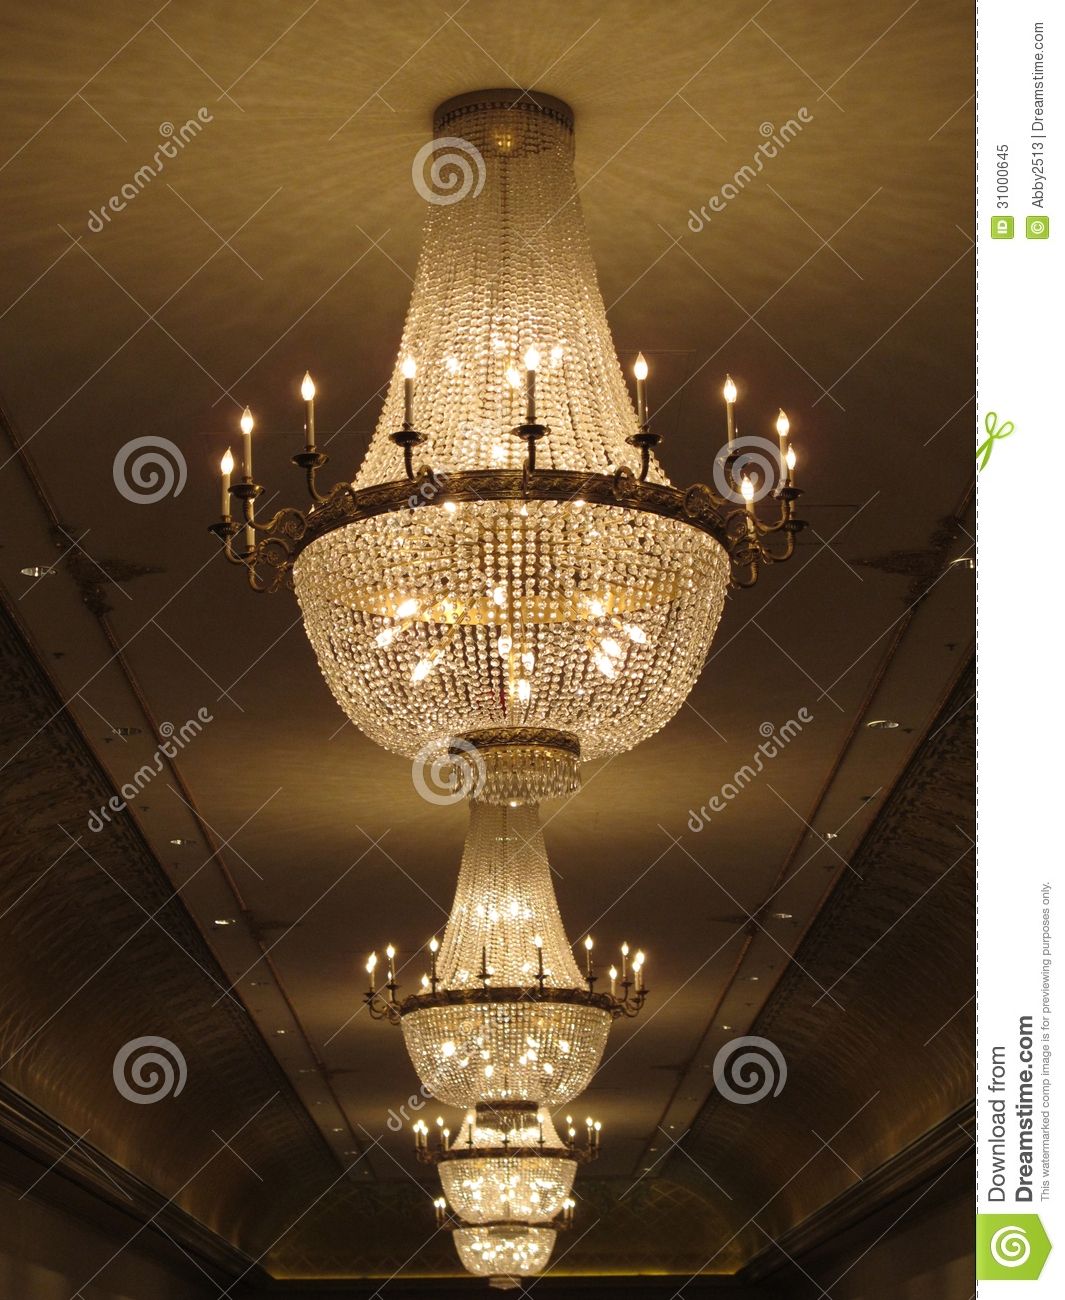 Gorgeous Crystal Chandelier Royalty Free Stock Photo Image 31000645 Within Huge Chandeliers (View 10 of 15)